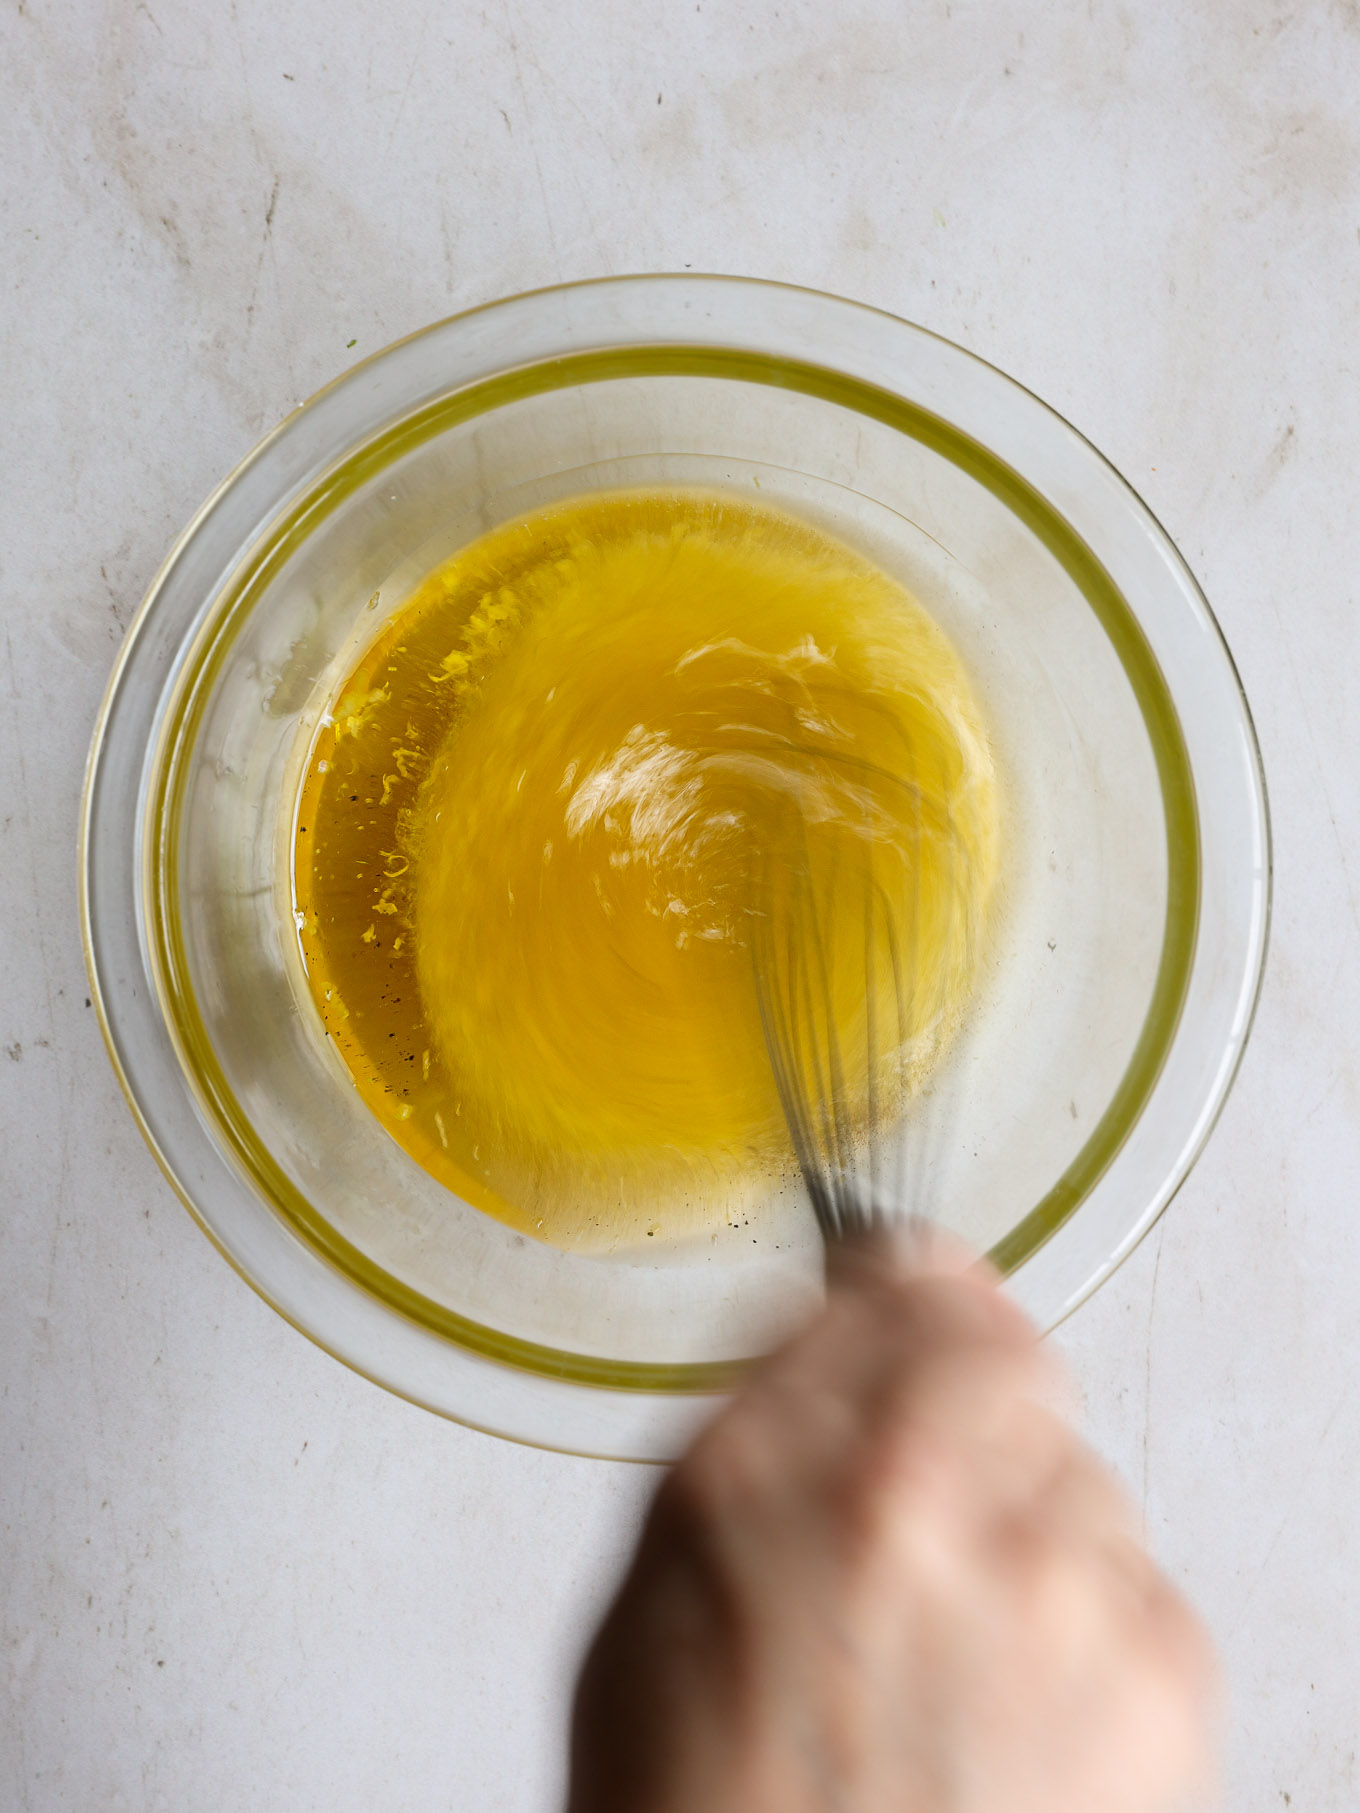 salad dressing in a glass bowl.